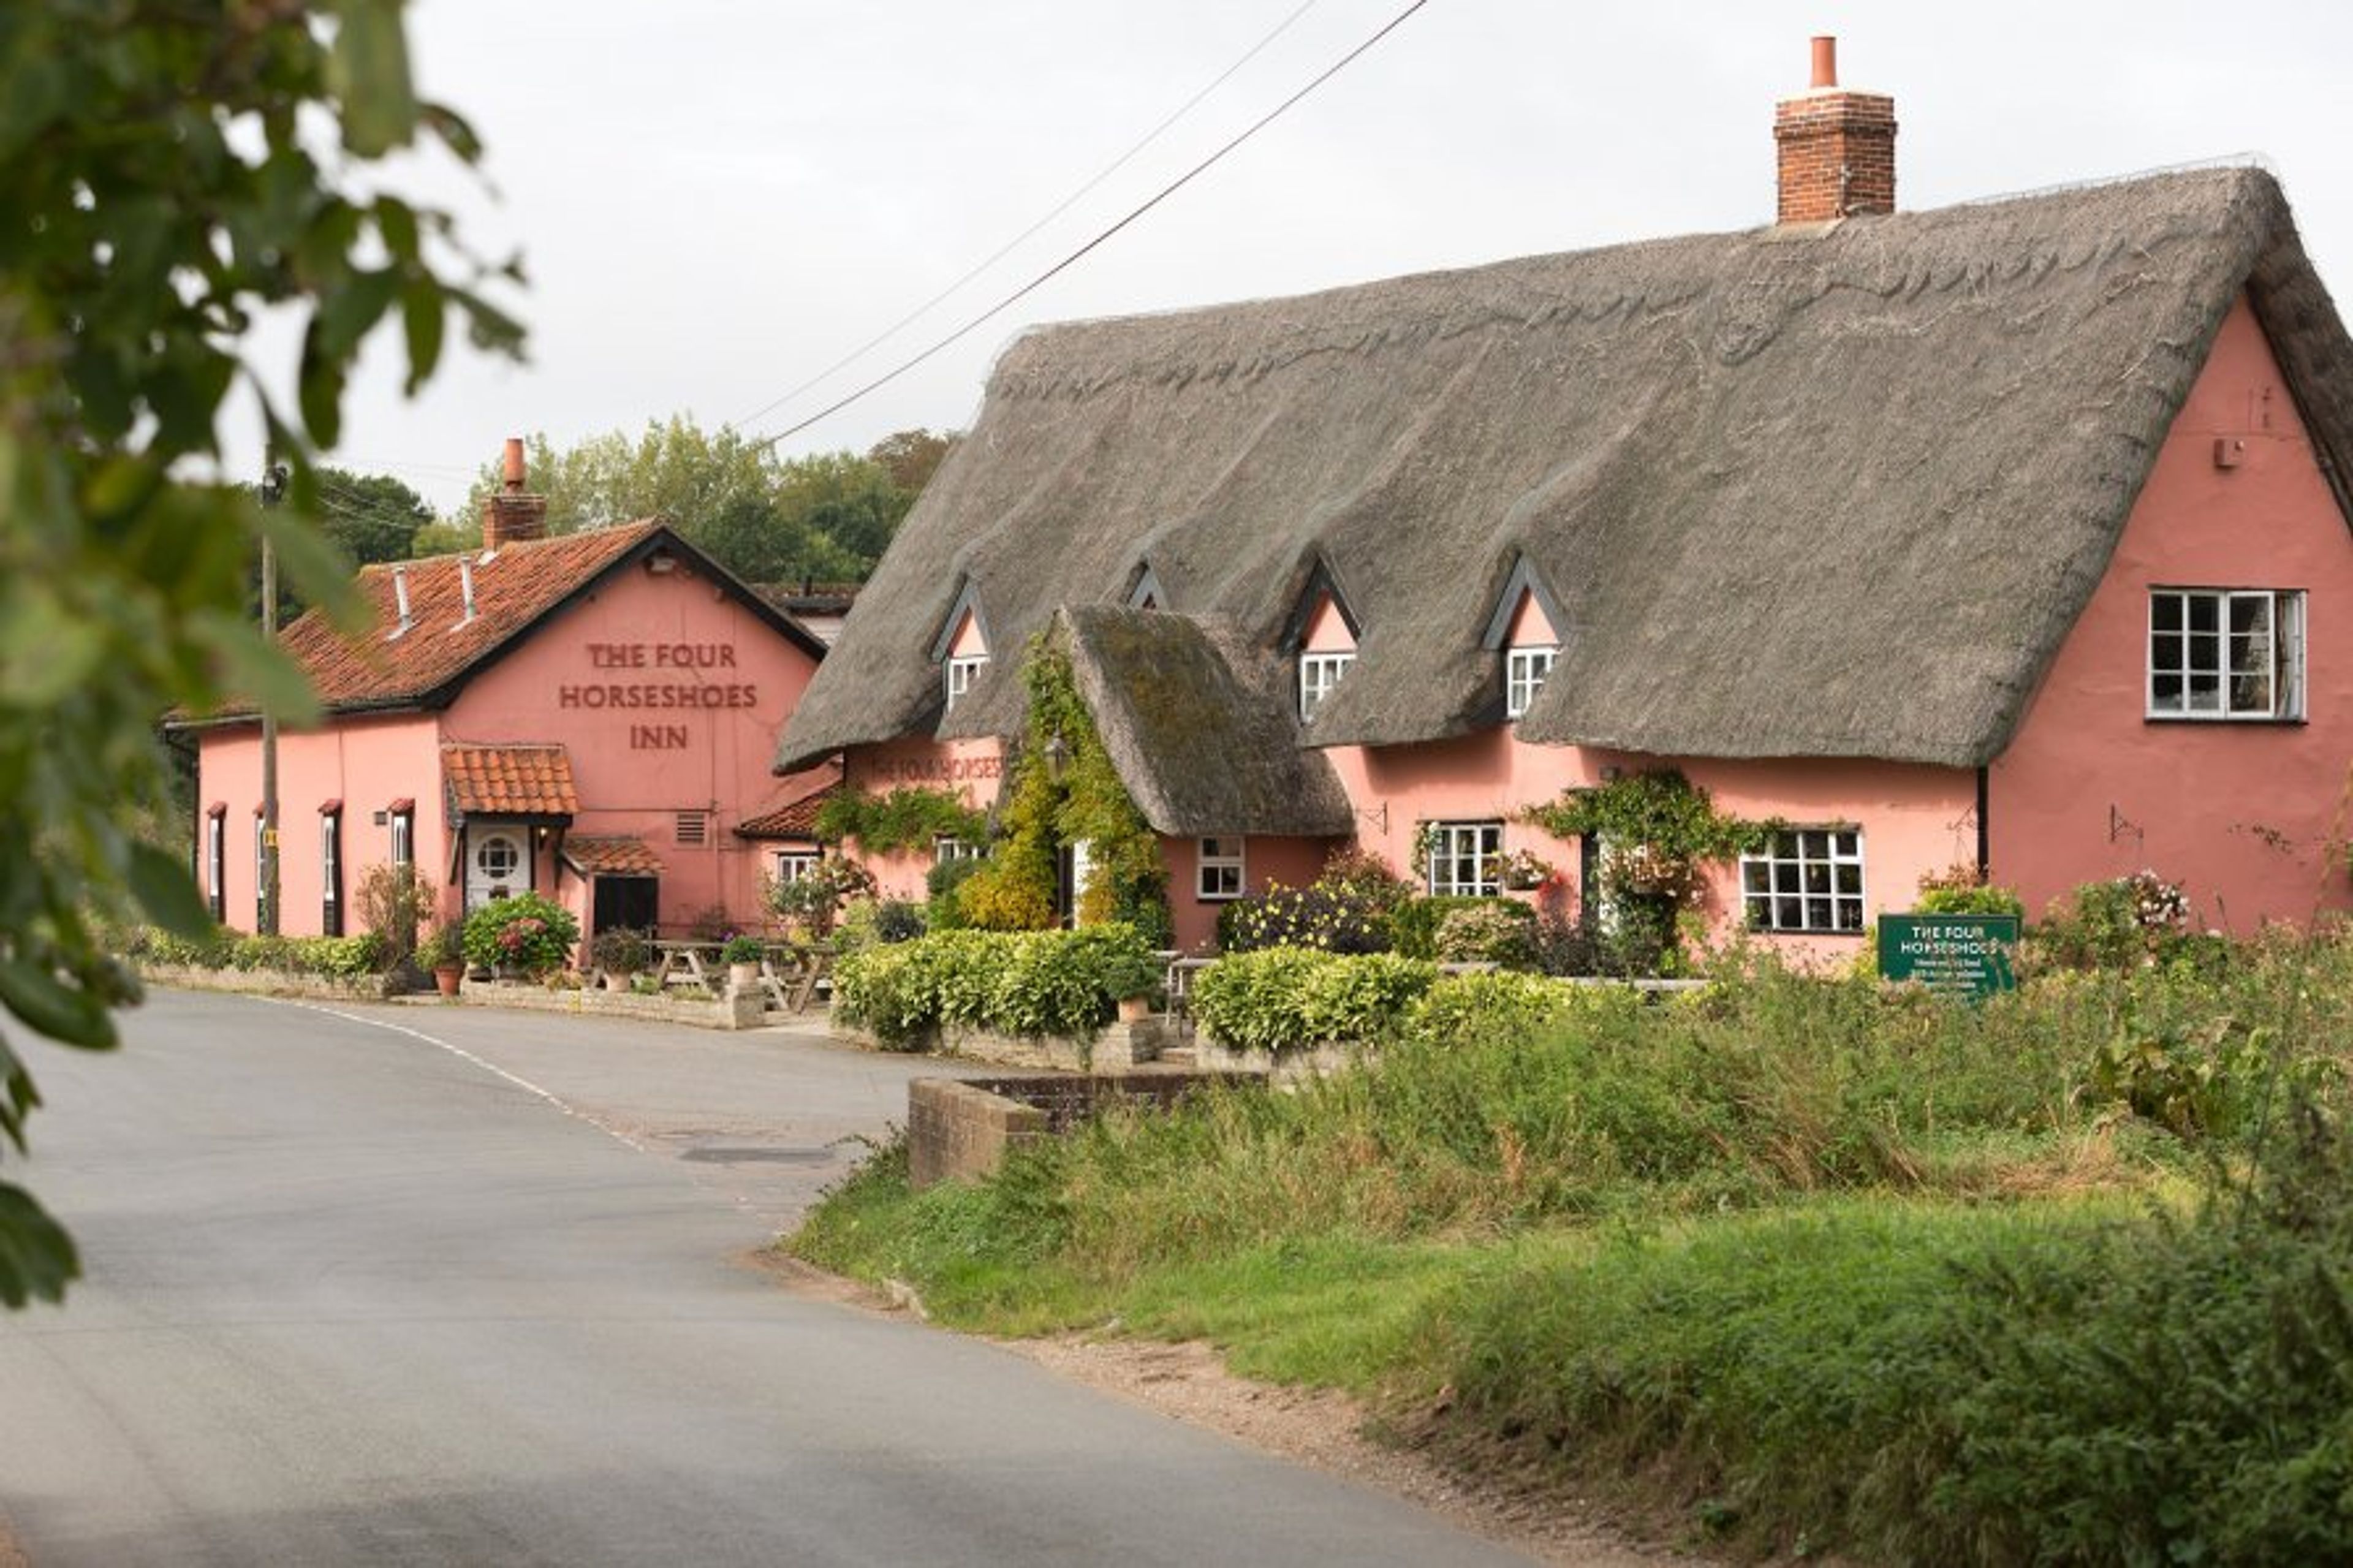 Within two miles the 12th century Four Horsehoes Inn is stunning.